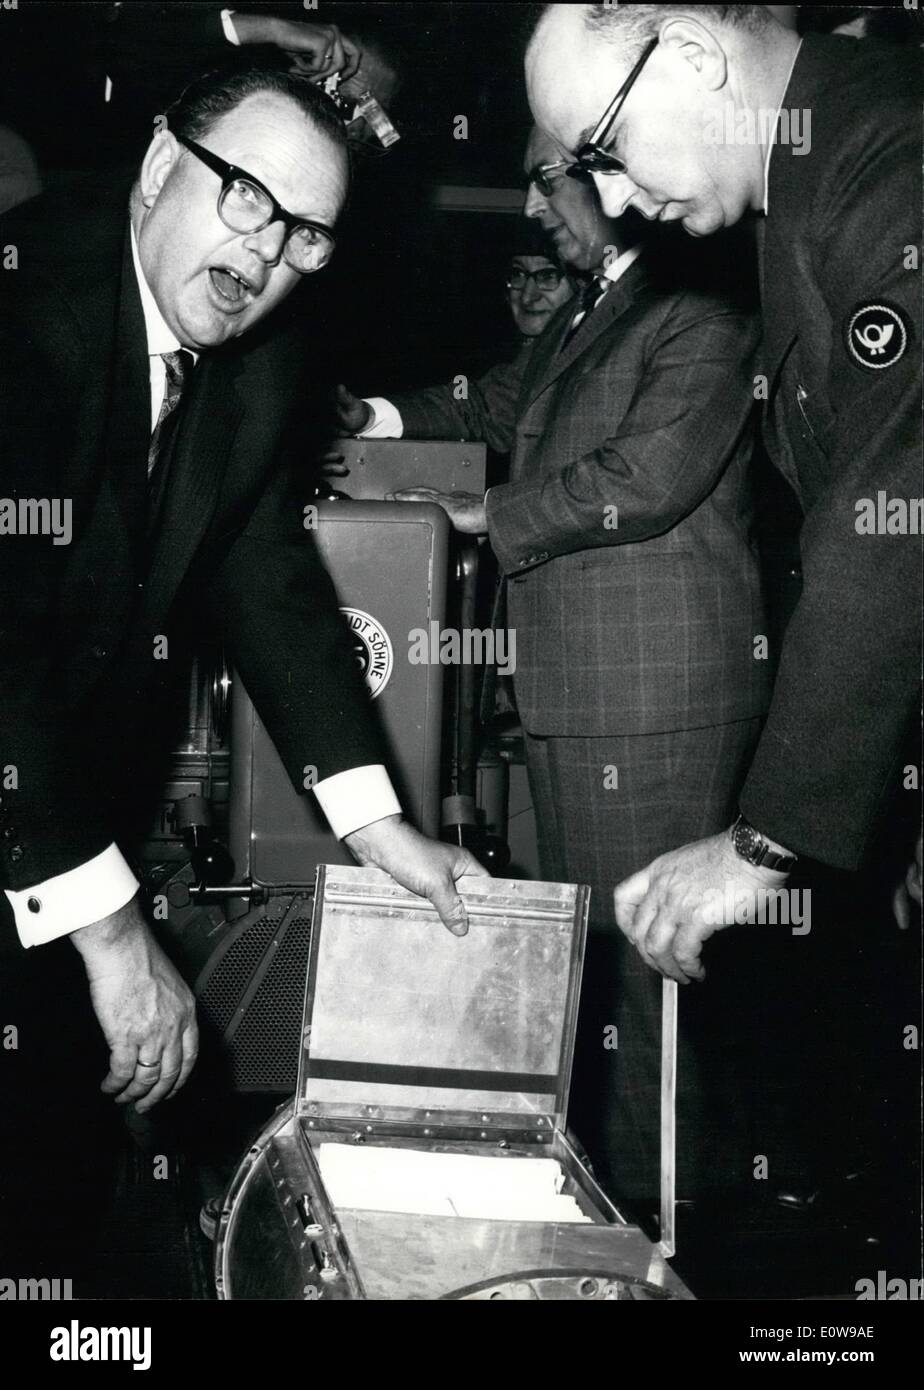 Feb. 02, 1962 - About 1.3 million Deutsche Mark; was invested in the first German big pneumatic post office which was enaugurated today in Hamburg. The ''historical pressure'' sending the first official box to the 1.8 km long distance, was affected by the German Minister of Posts, Mr. Stucklen. The experimental installation which is also the biggest in Europe, will follow others in all towns of the Federal Republic of Germany, with more than 100.000 inhabitants Photo Shows Assisted by an expert the German Minister of Post, Mr. Stucklen started the first official box at the 1 Stock Photo